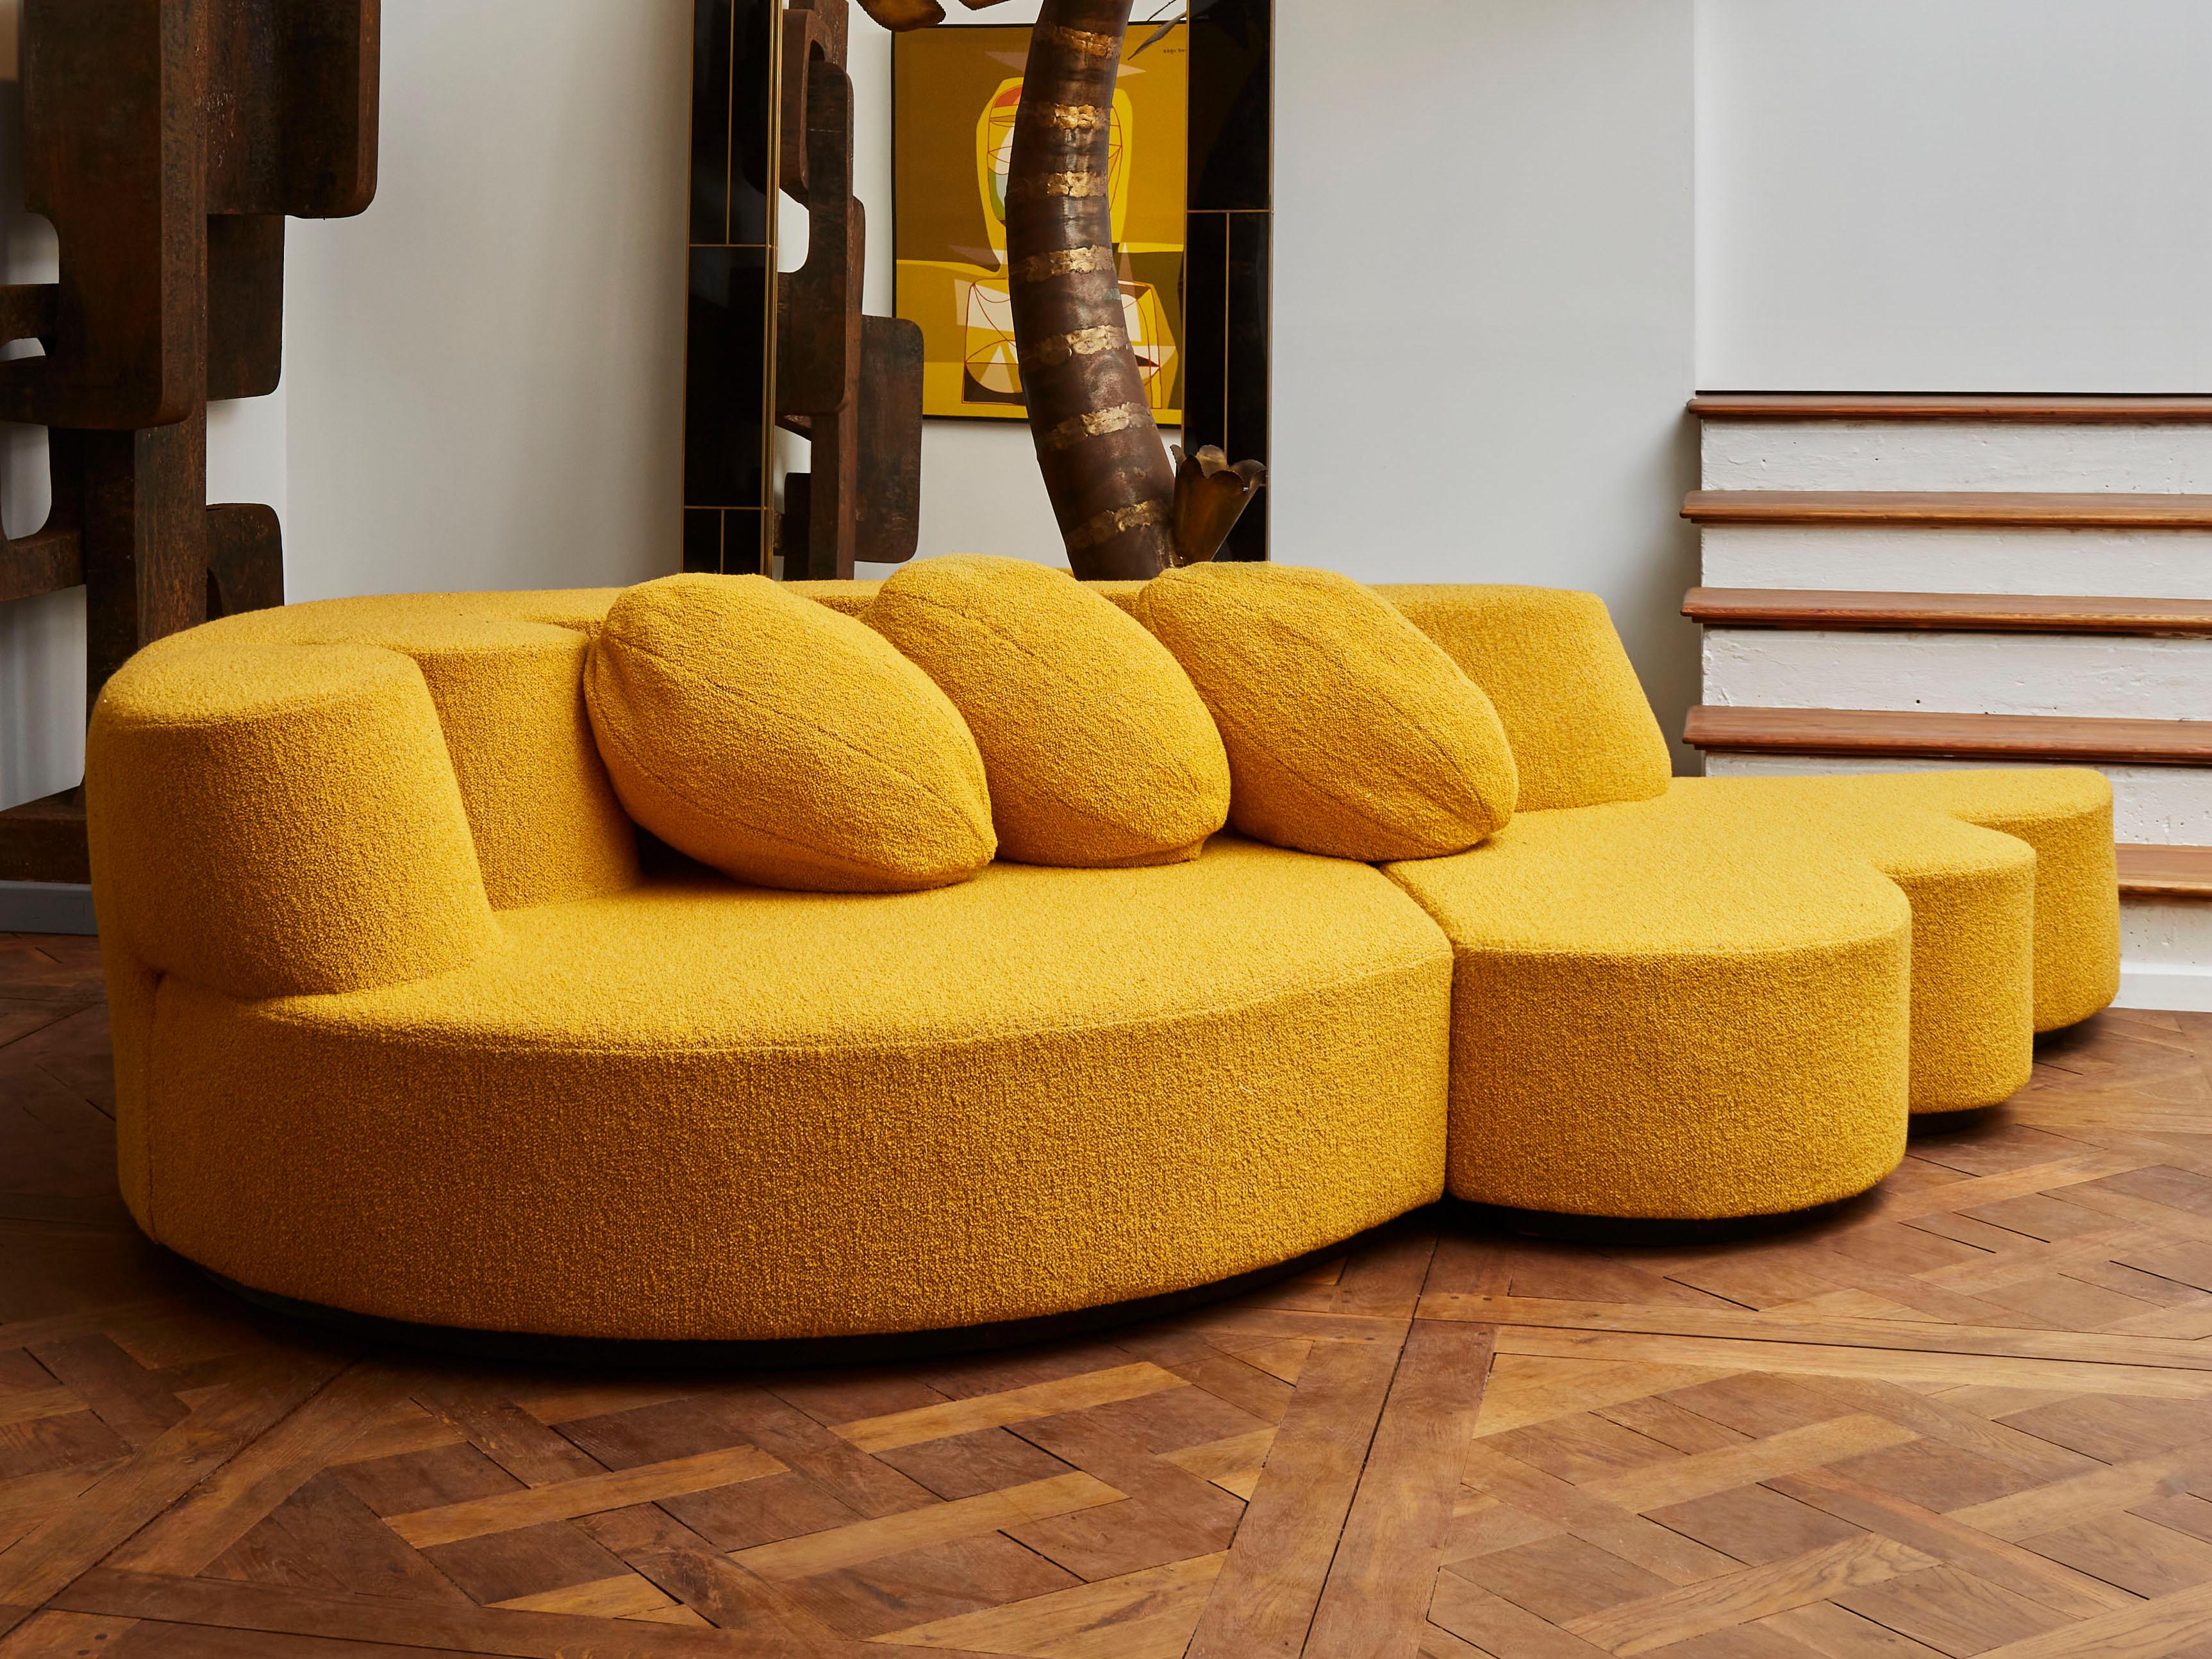 Exceptional vintage sofa in 2 parts with custom made cushions, entirely restored and reupholstered with a mustard bouclette fabric by Nobilis.
France, 1970s.